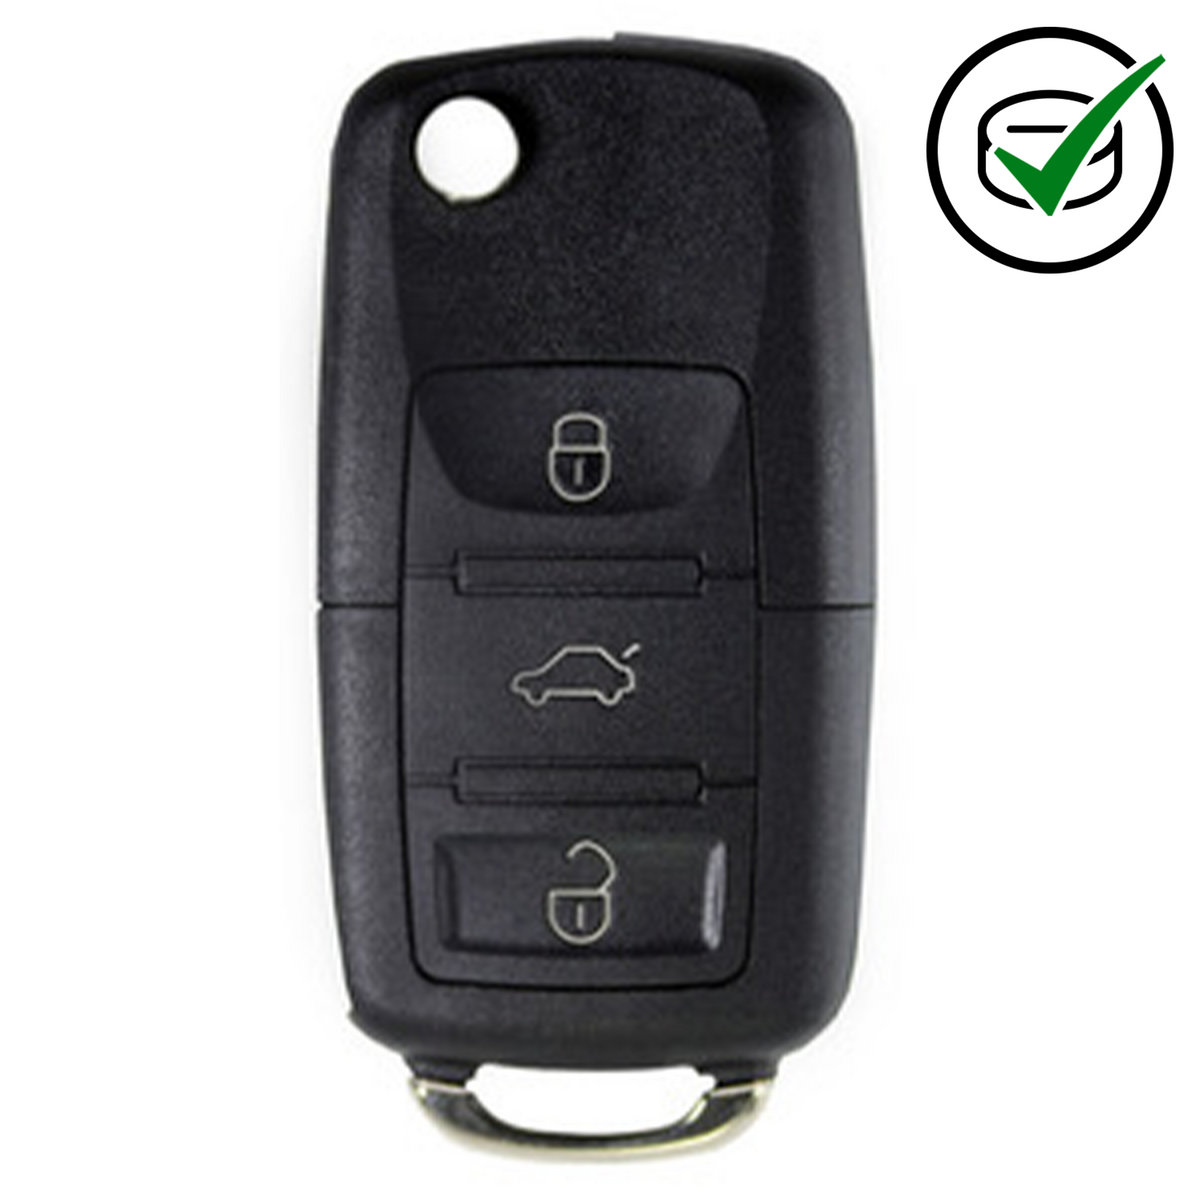 KD 900 key remote 3 button with panic VW Style